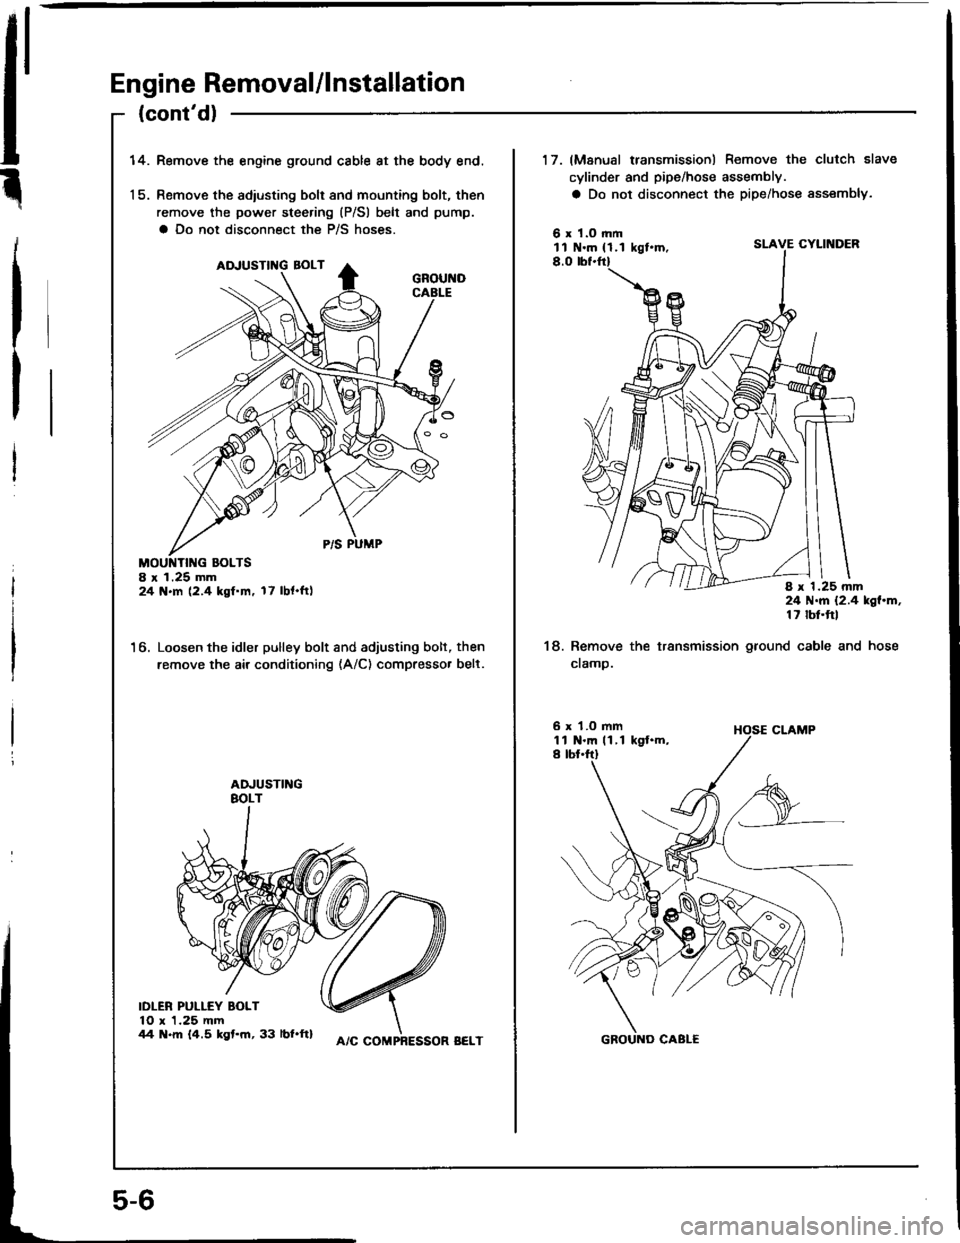 ACURA INTEGRA 1994  Service Repair Manual Engine Removal/lnstallation
(contd)
14.Remove the engine ground cable at the body end.
Remove the adiusting bolt and mounting bolt, then
remove the power steering (P/Sl belt and pump.
a Do not discon